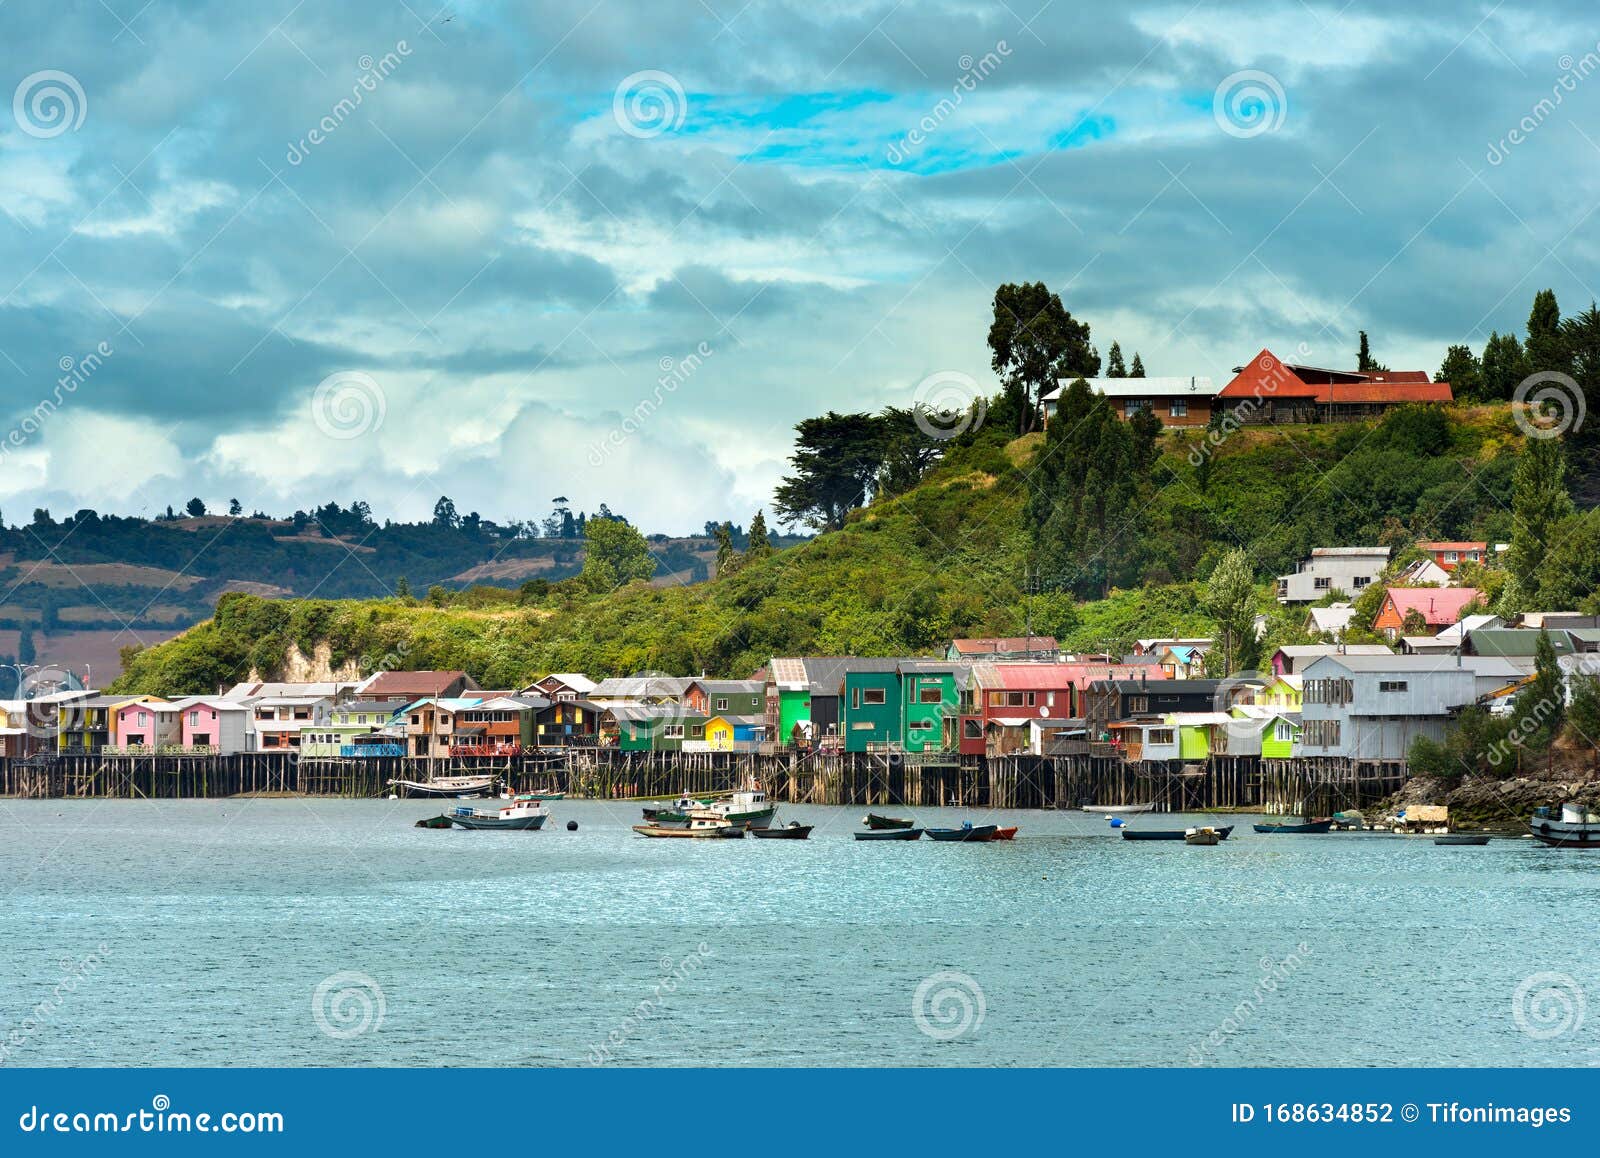 traditional stilt houses known as palafitos in castro, chiloe island